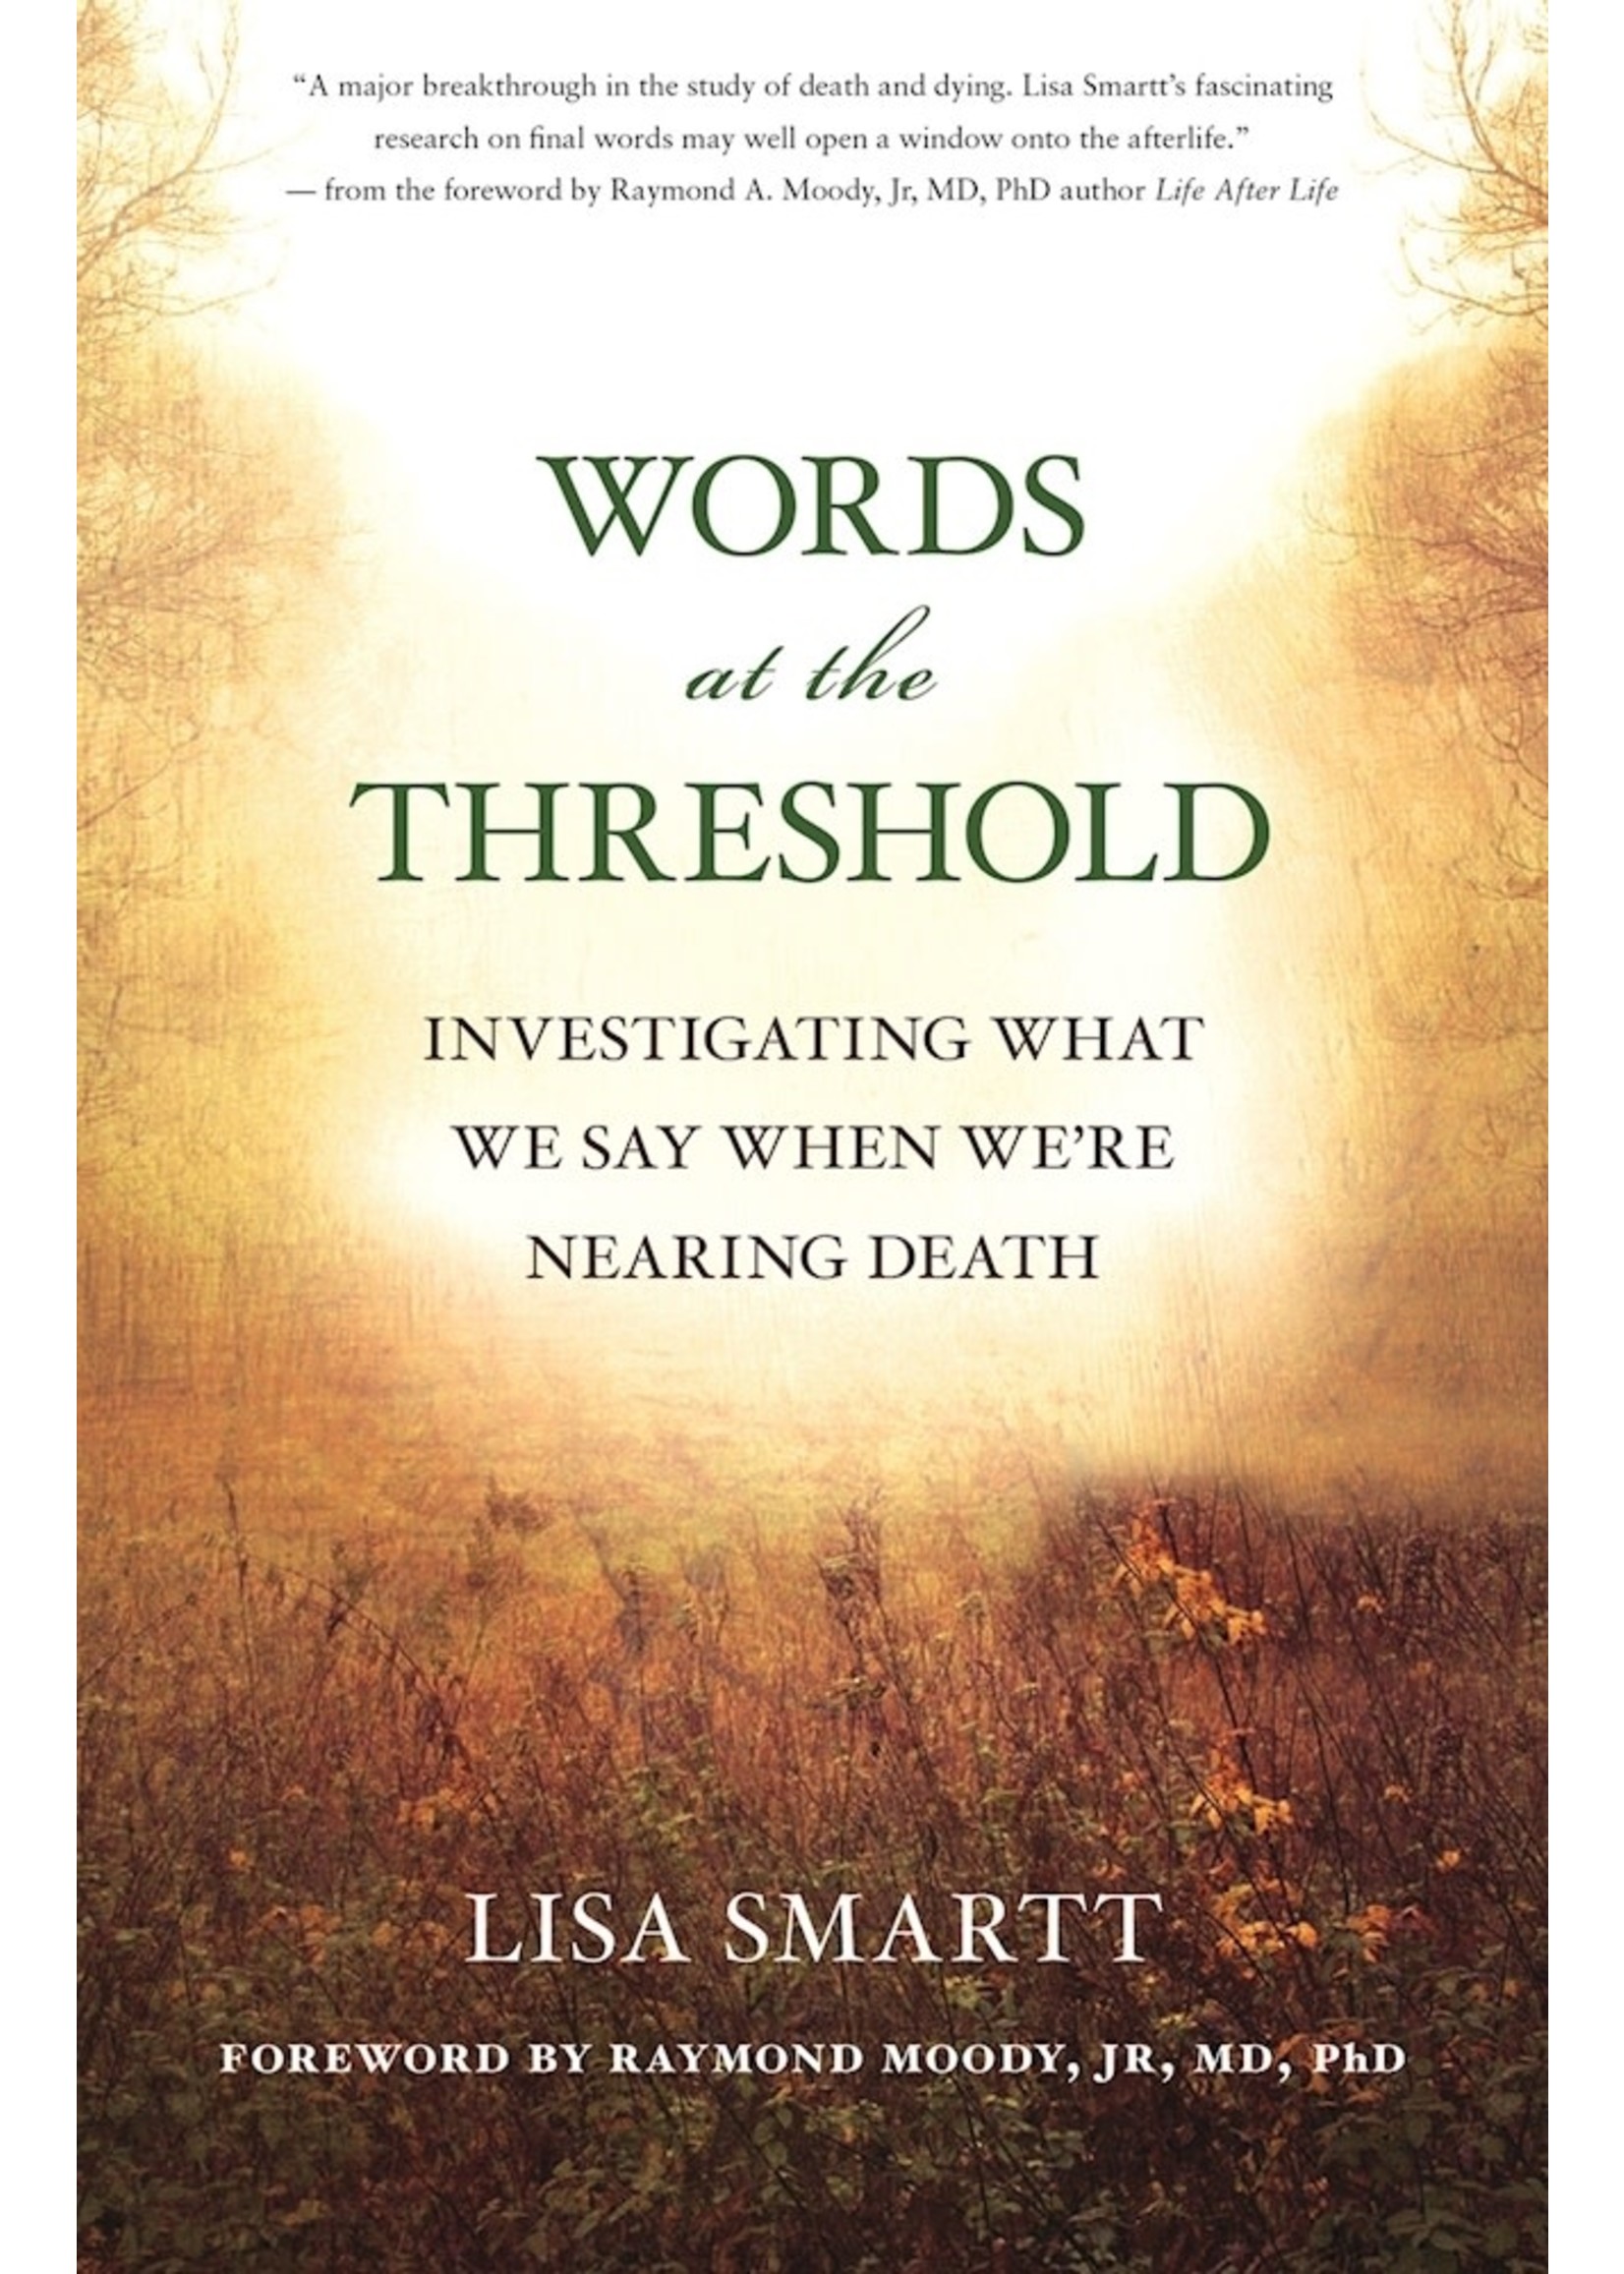 Words at the Threshold: What We Say as We're Nearing Death by Lisa Smartt